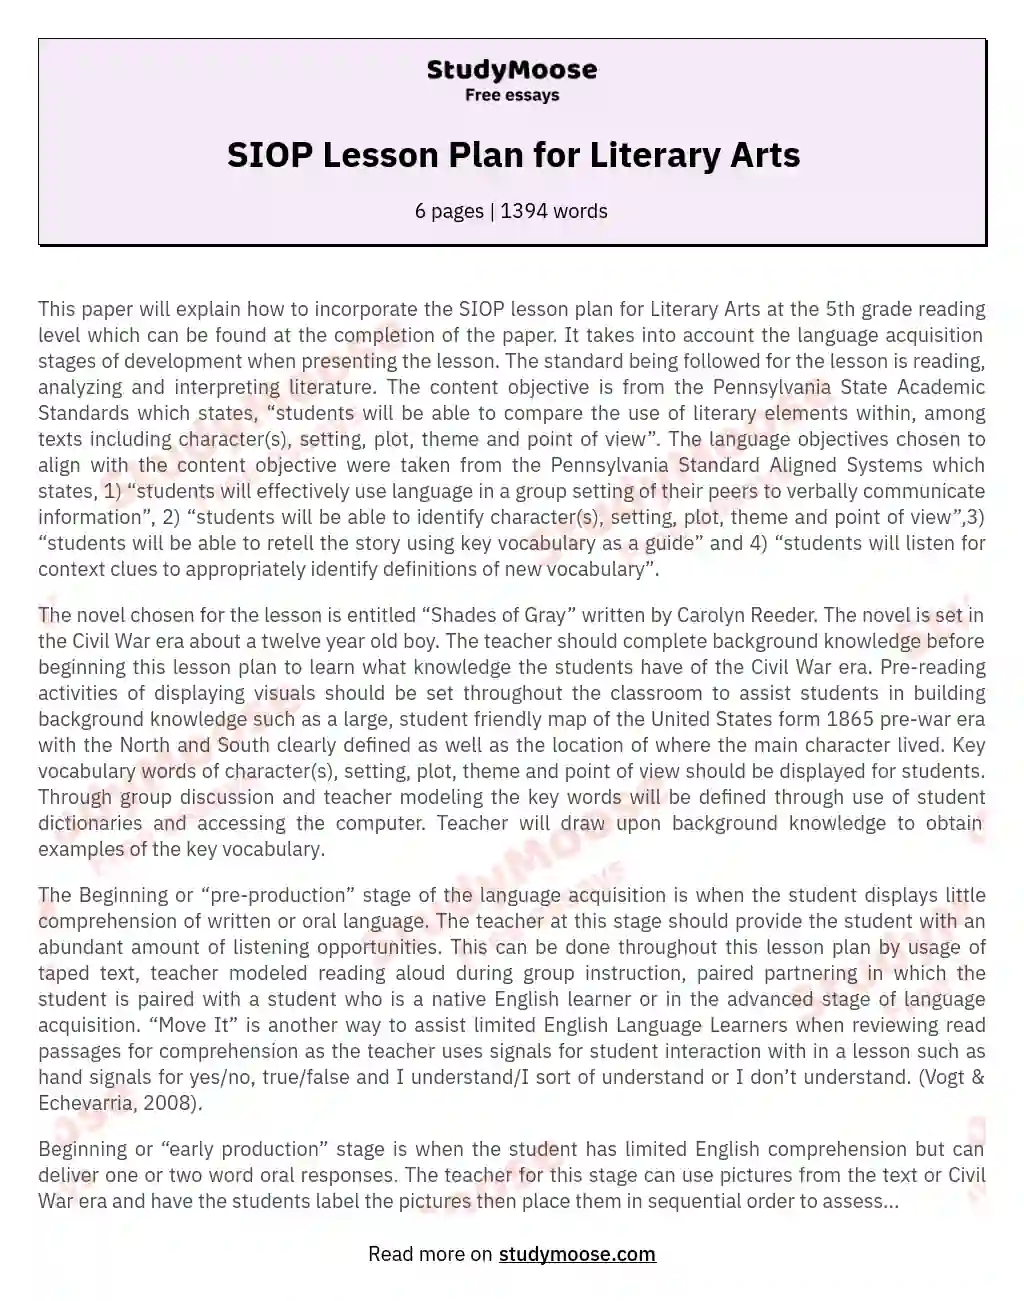 Implementing SIOP Lesson Plan for Literary Arts at 5th Grade essay